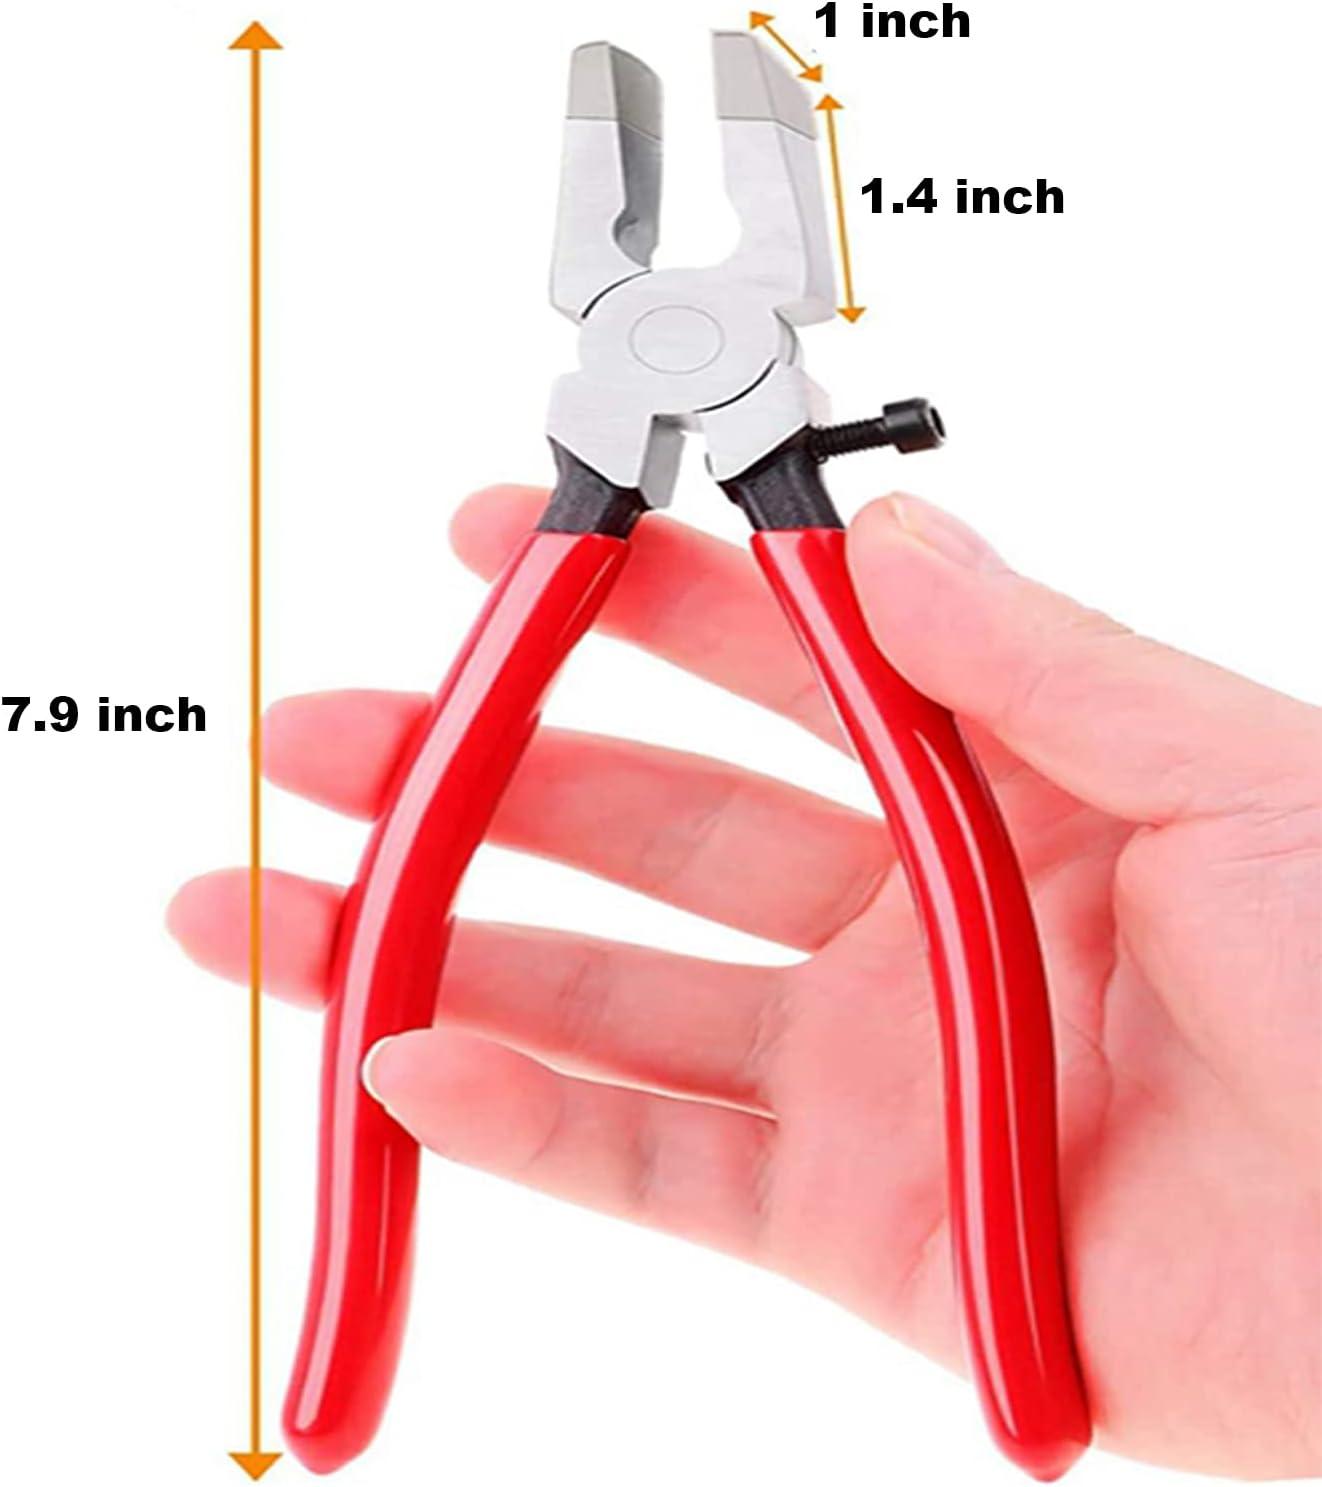 Key Fob Pliers Tool, 8 inch Glass Running Pliers Attach Rubber Tips, with Adjustable Screw